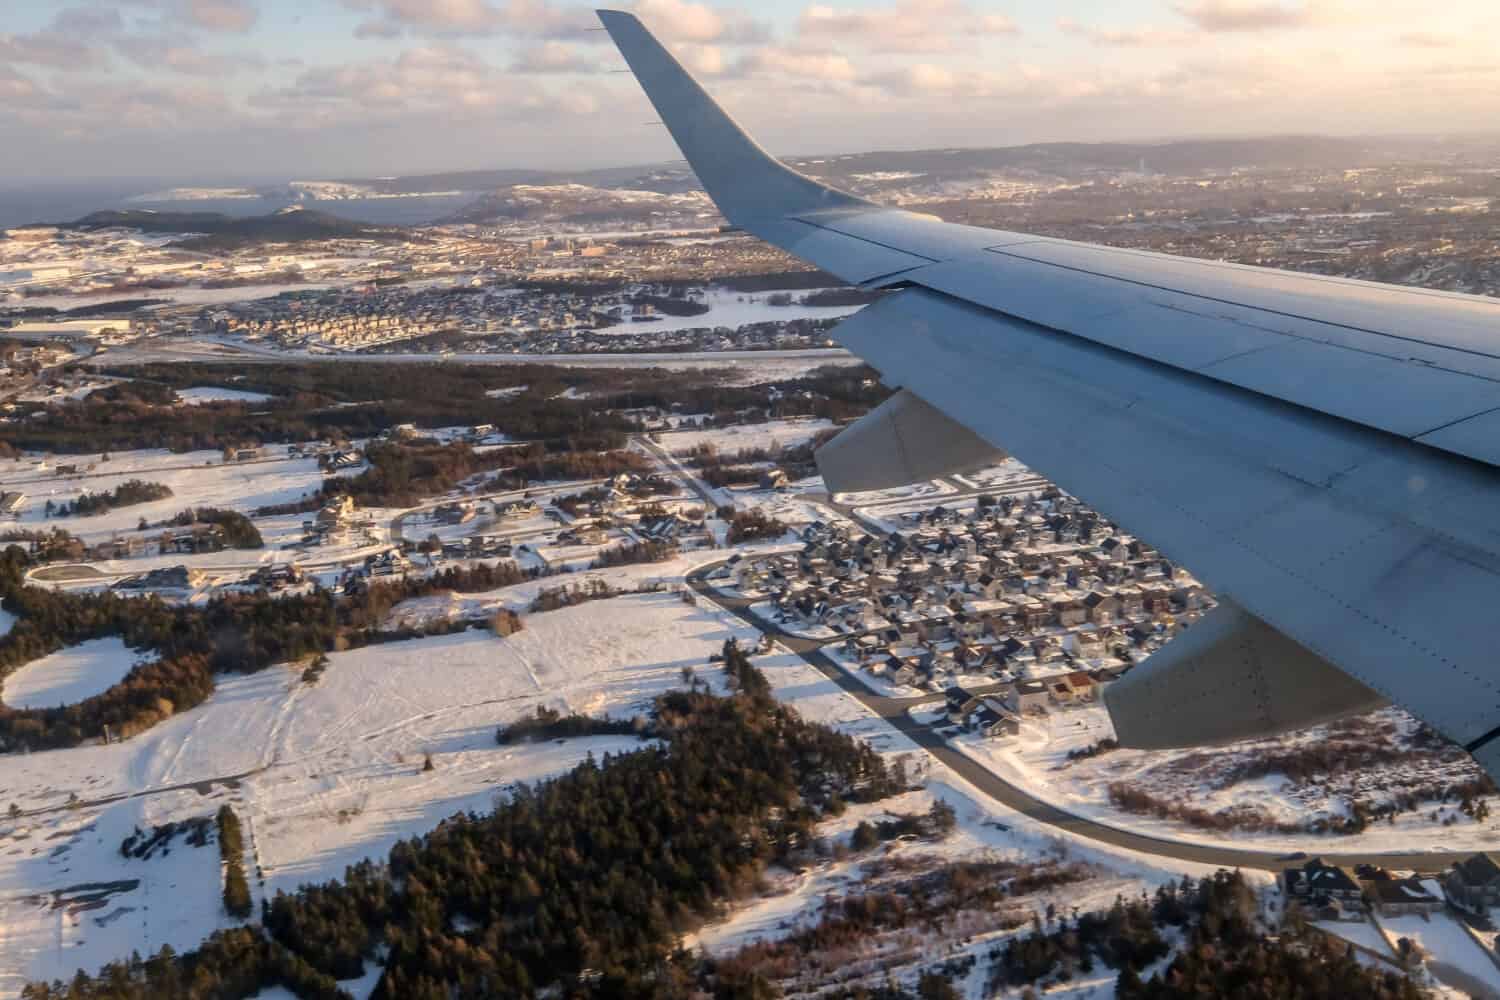 The left side wing of a large white commercial plane flying over the City of St. John's, Newfoundland under the evening sun. The sky is cloudy. The neighbourhood grounds below are covered in snow.